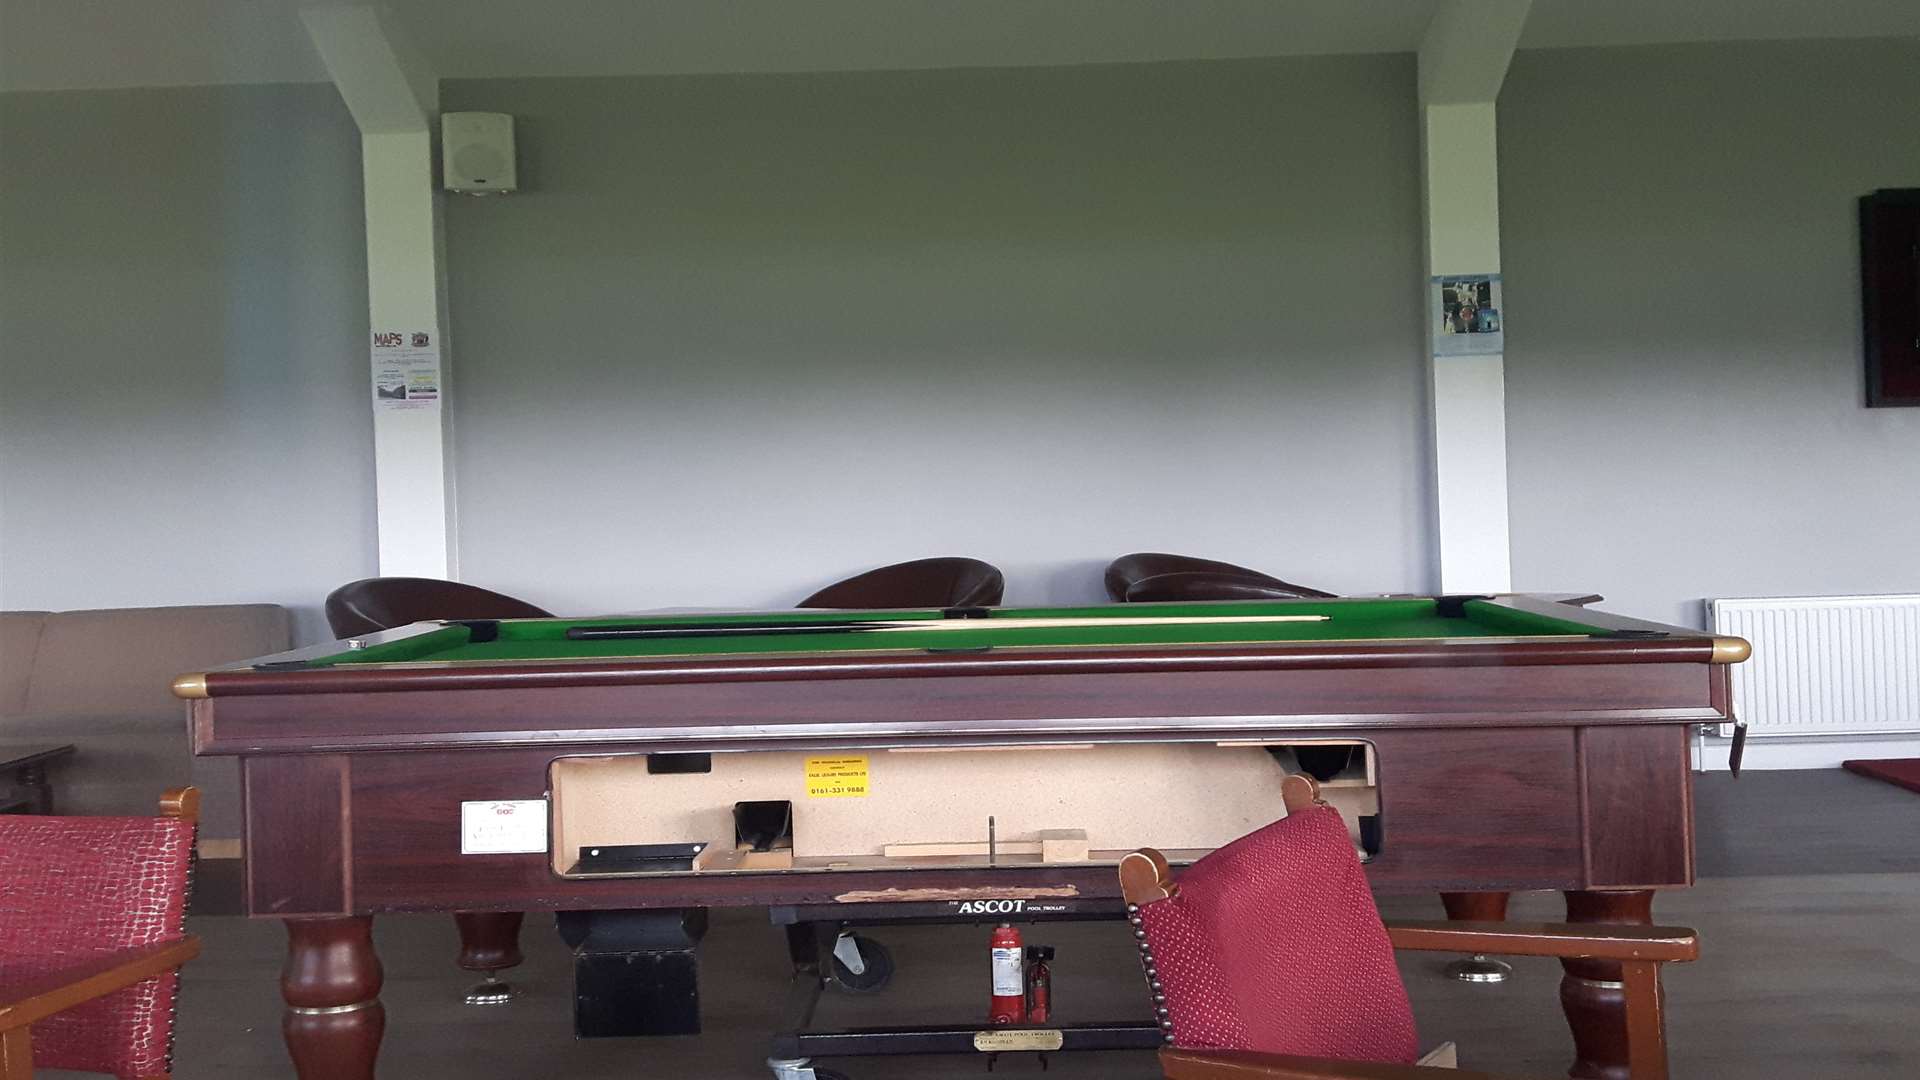 The raided pool table after the Deal Town Football Club burglary